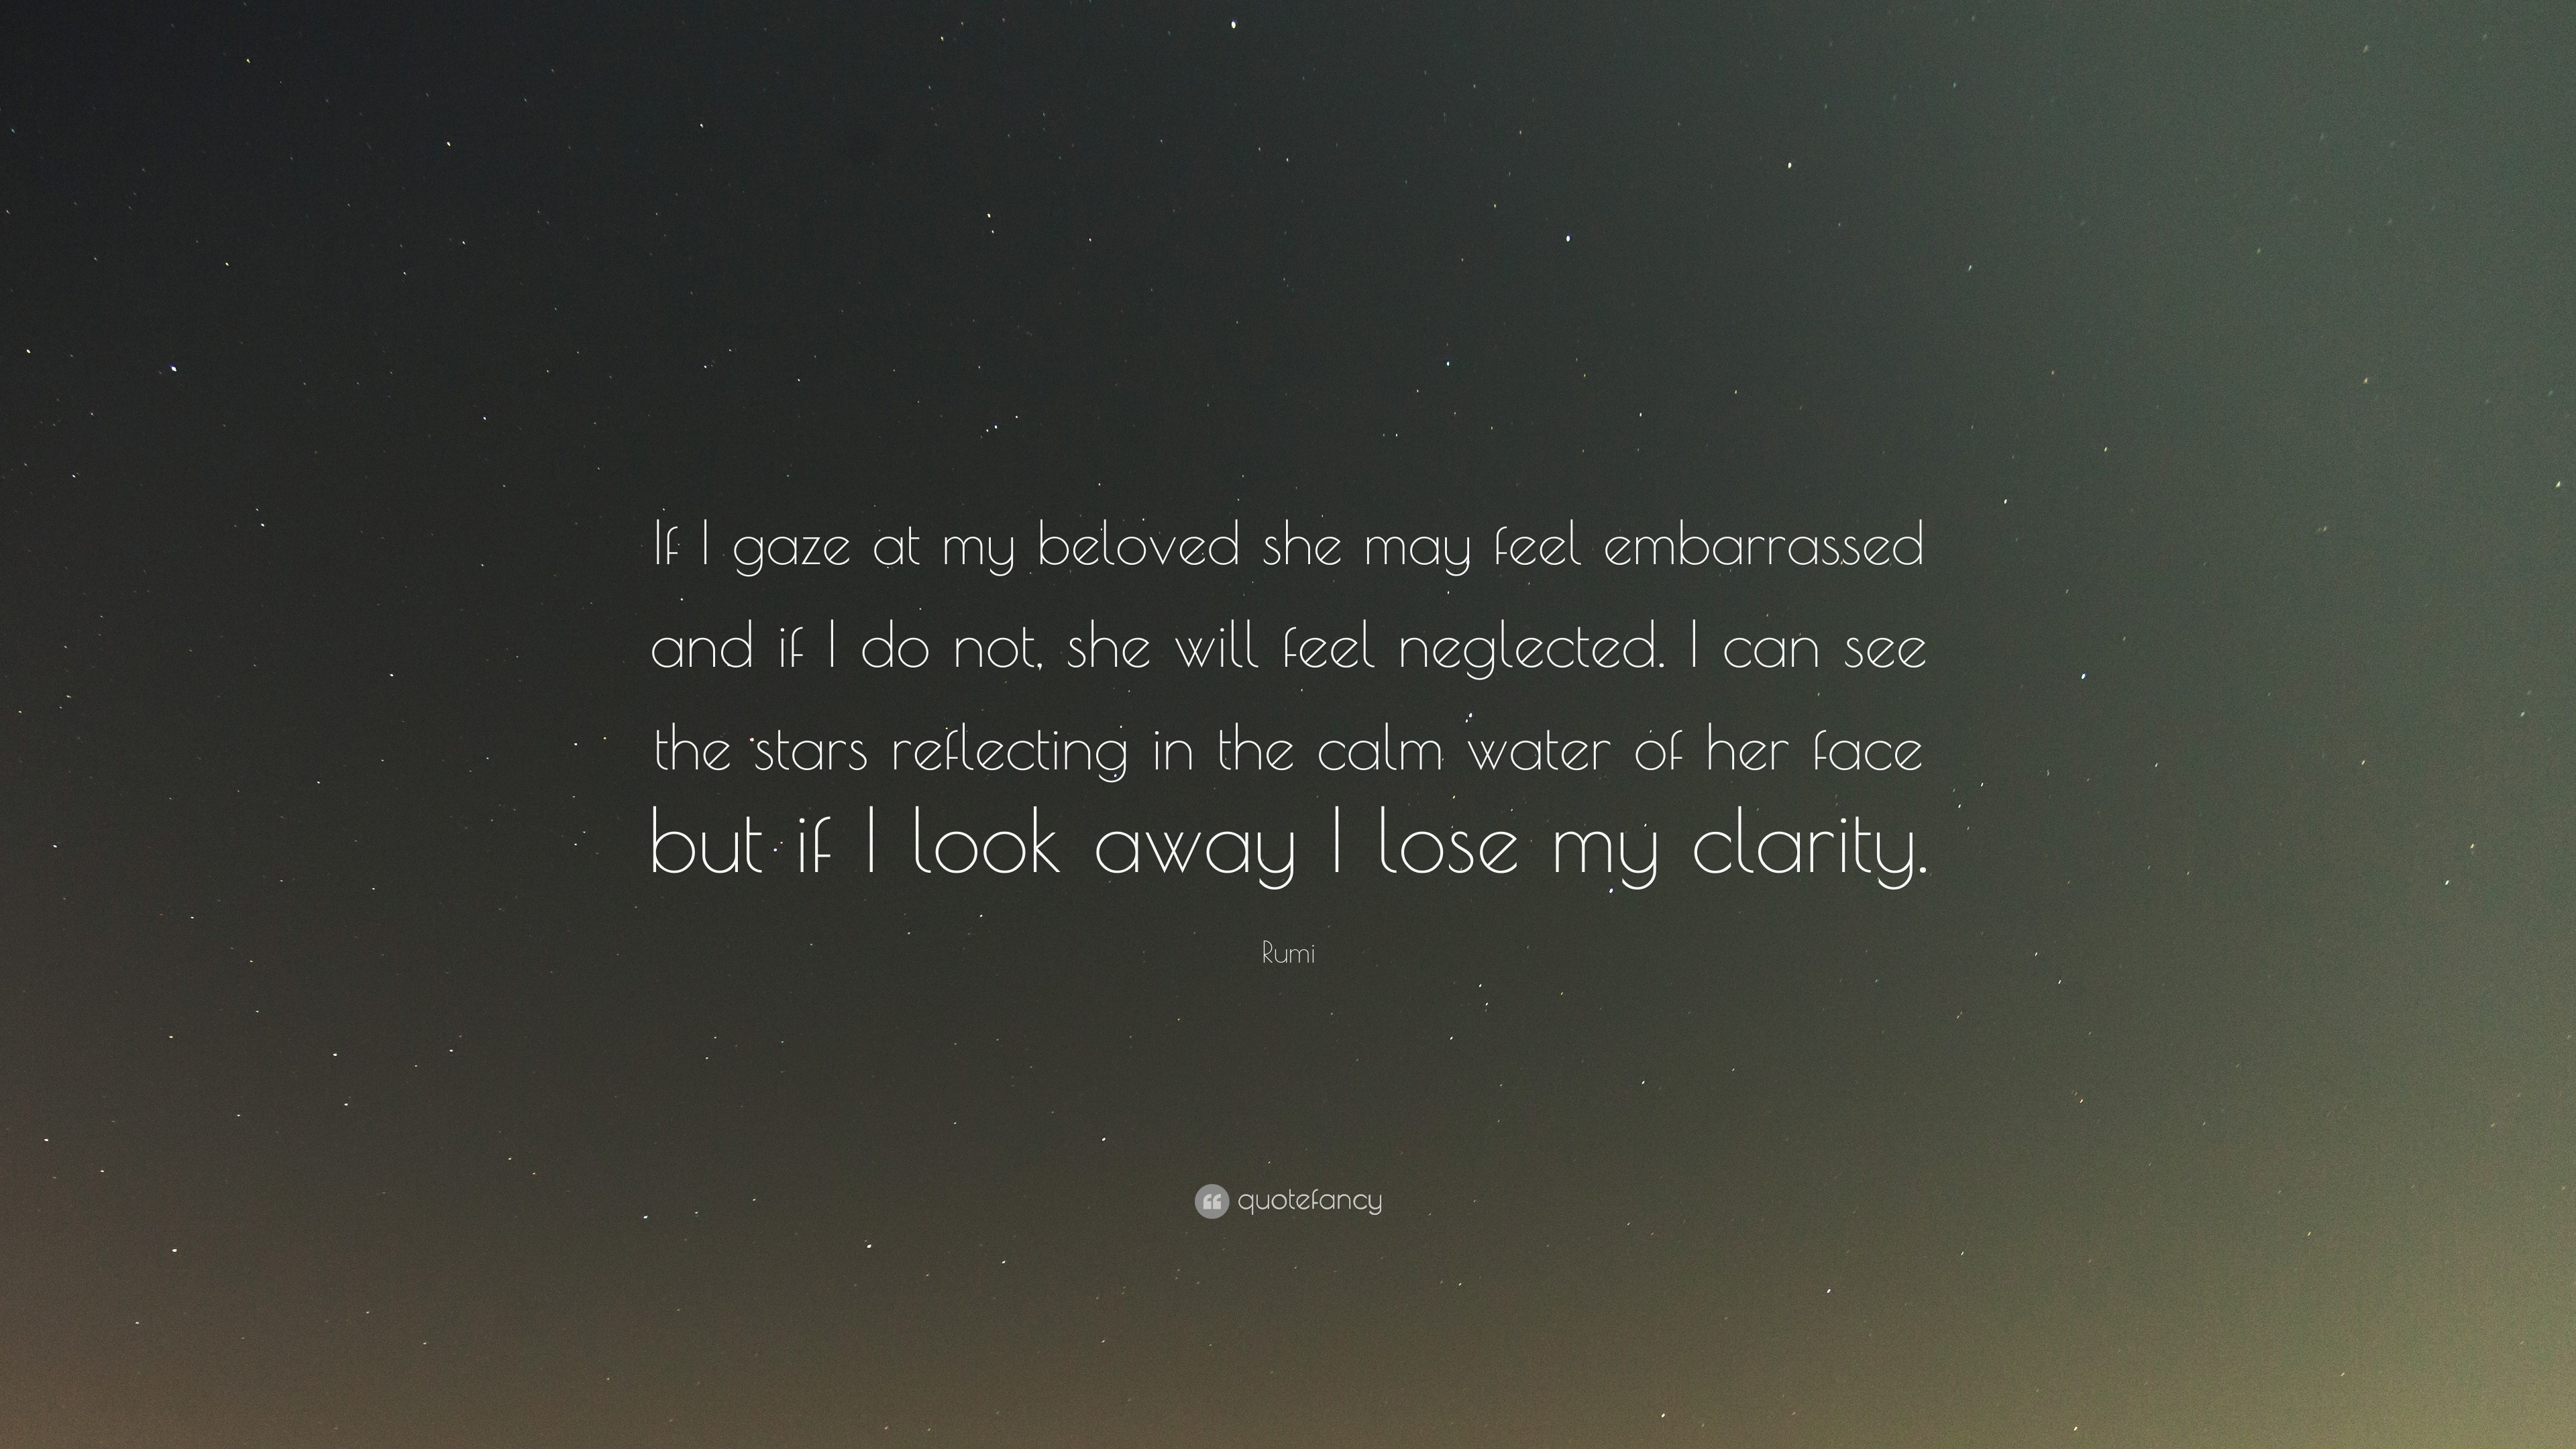 Rumi Quote “If I gaze at my beloved she may feel embarrassed and if